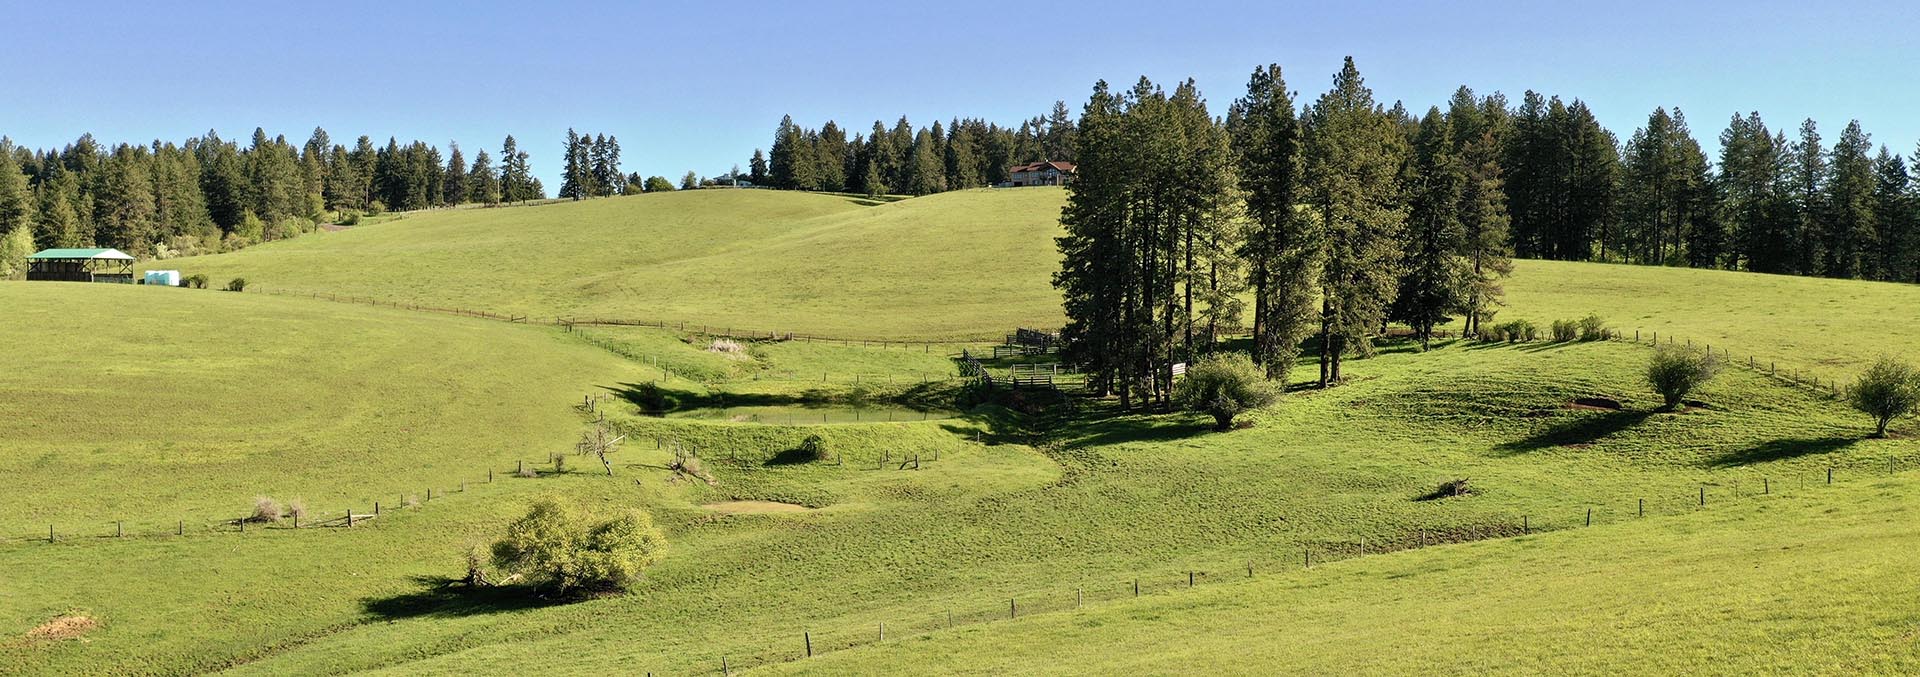 idaho ranches for sale henry cattle ranch